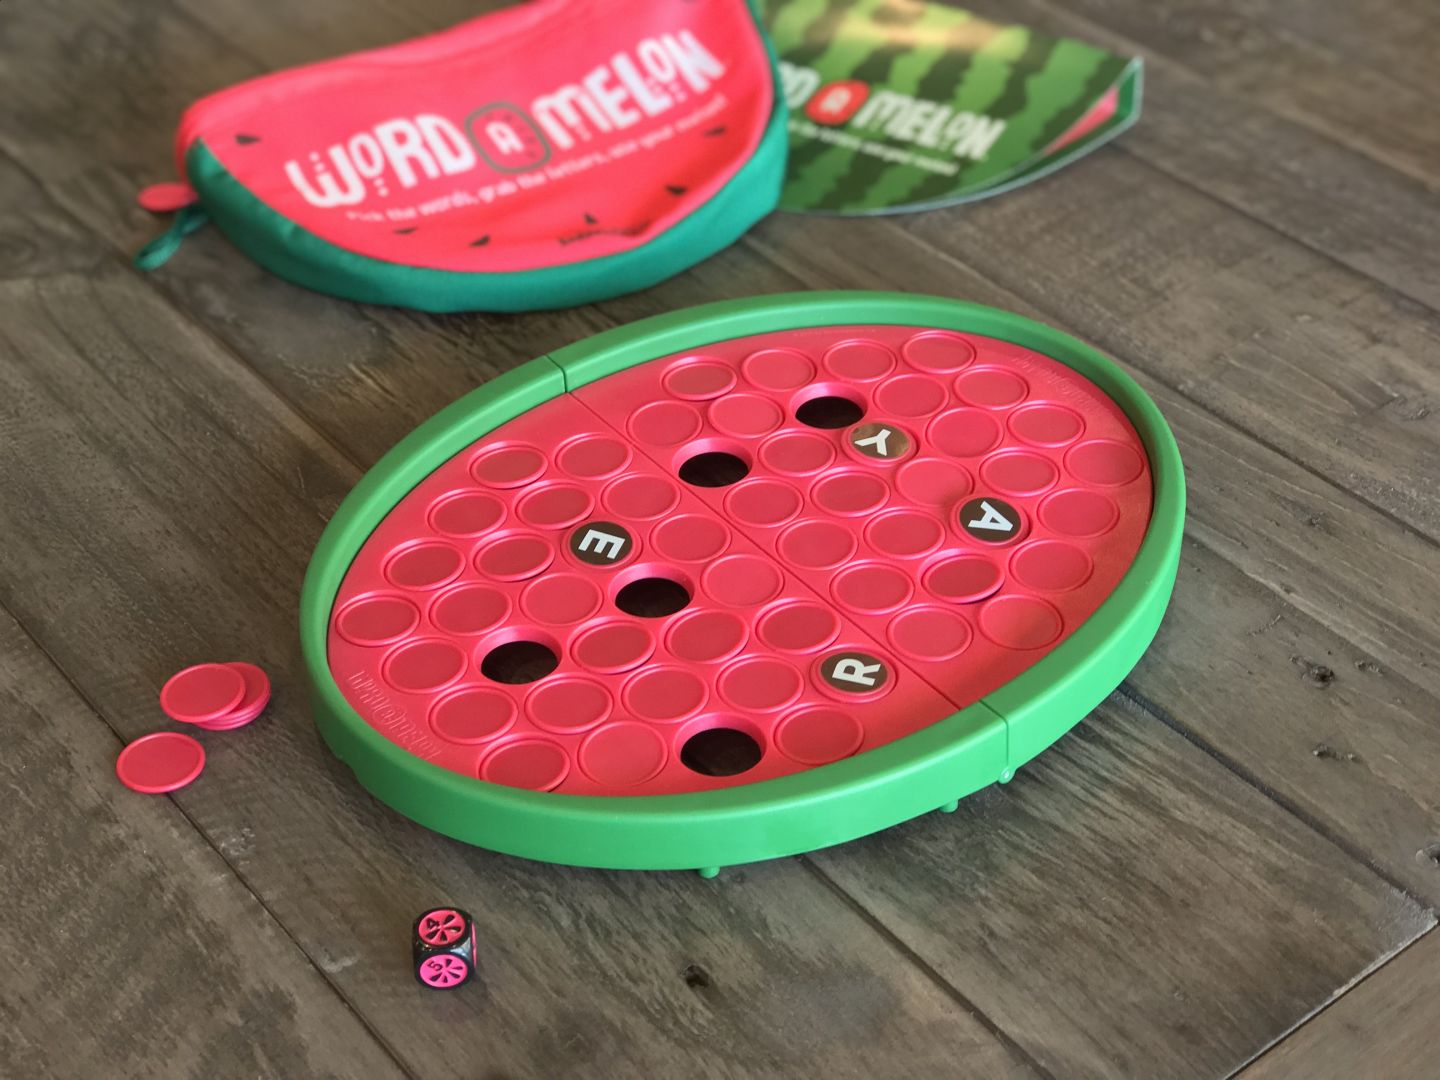 How To Play Word-A-Melon - Instructions